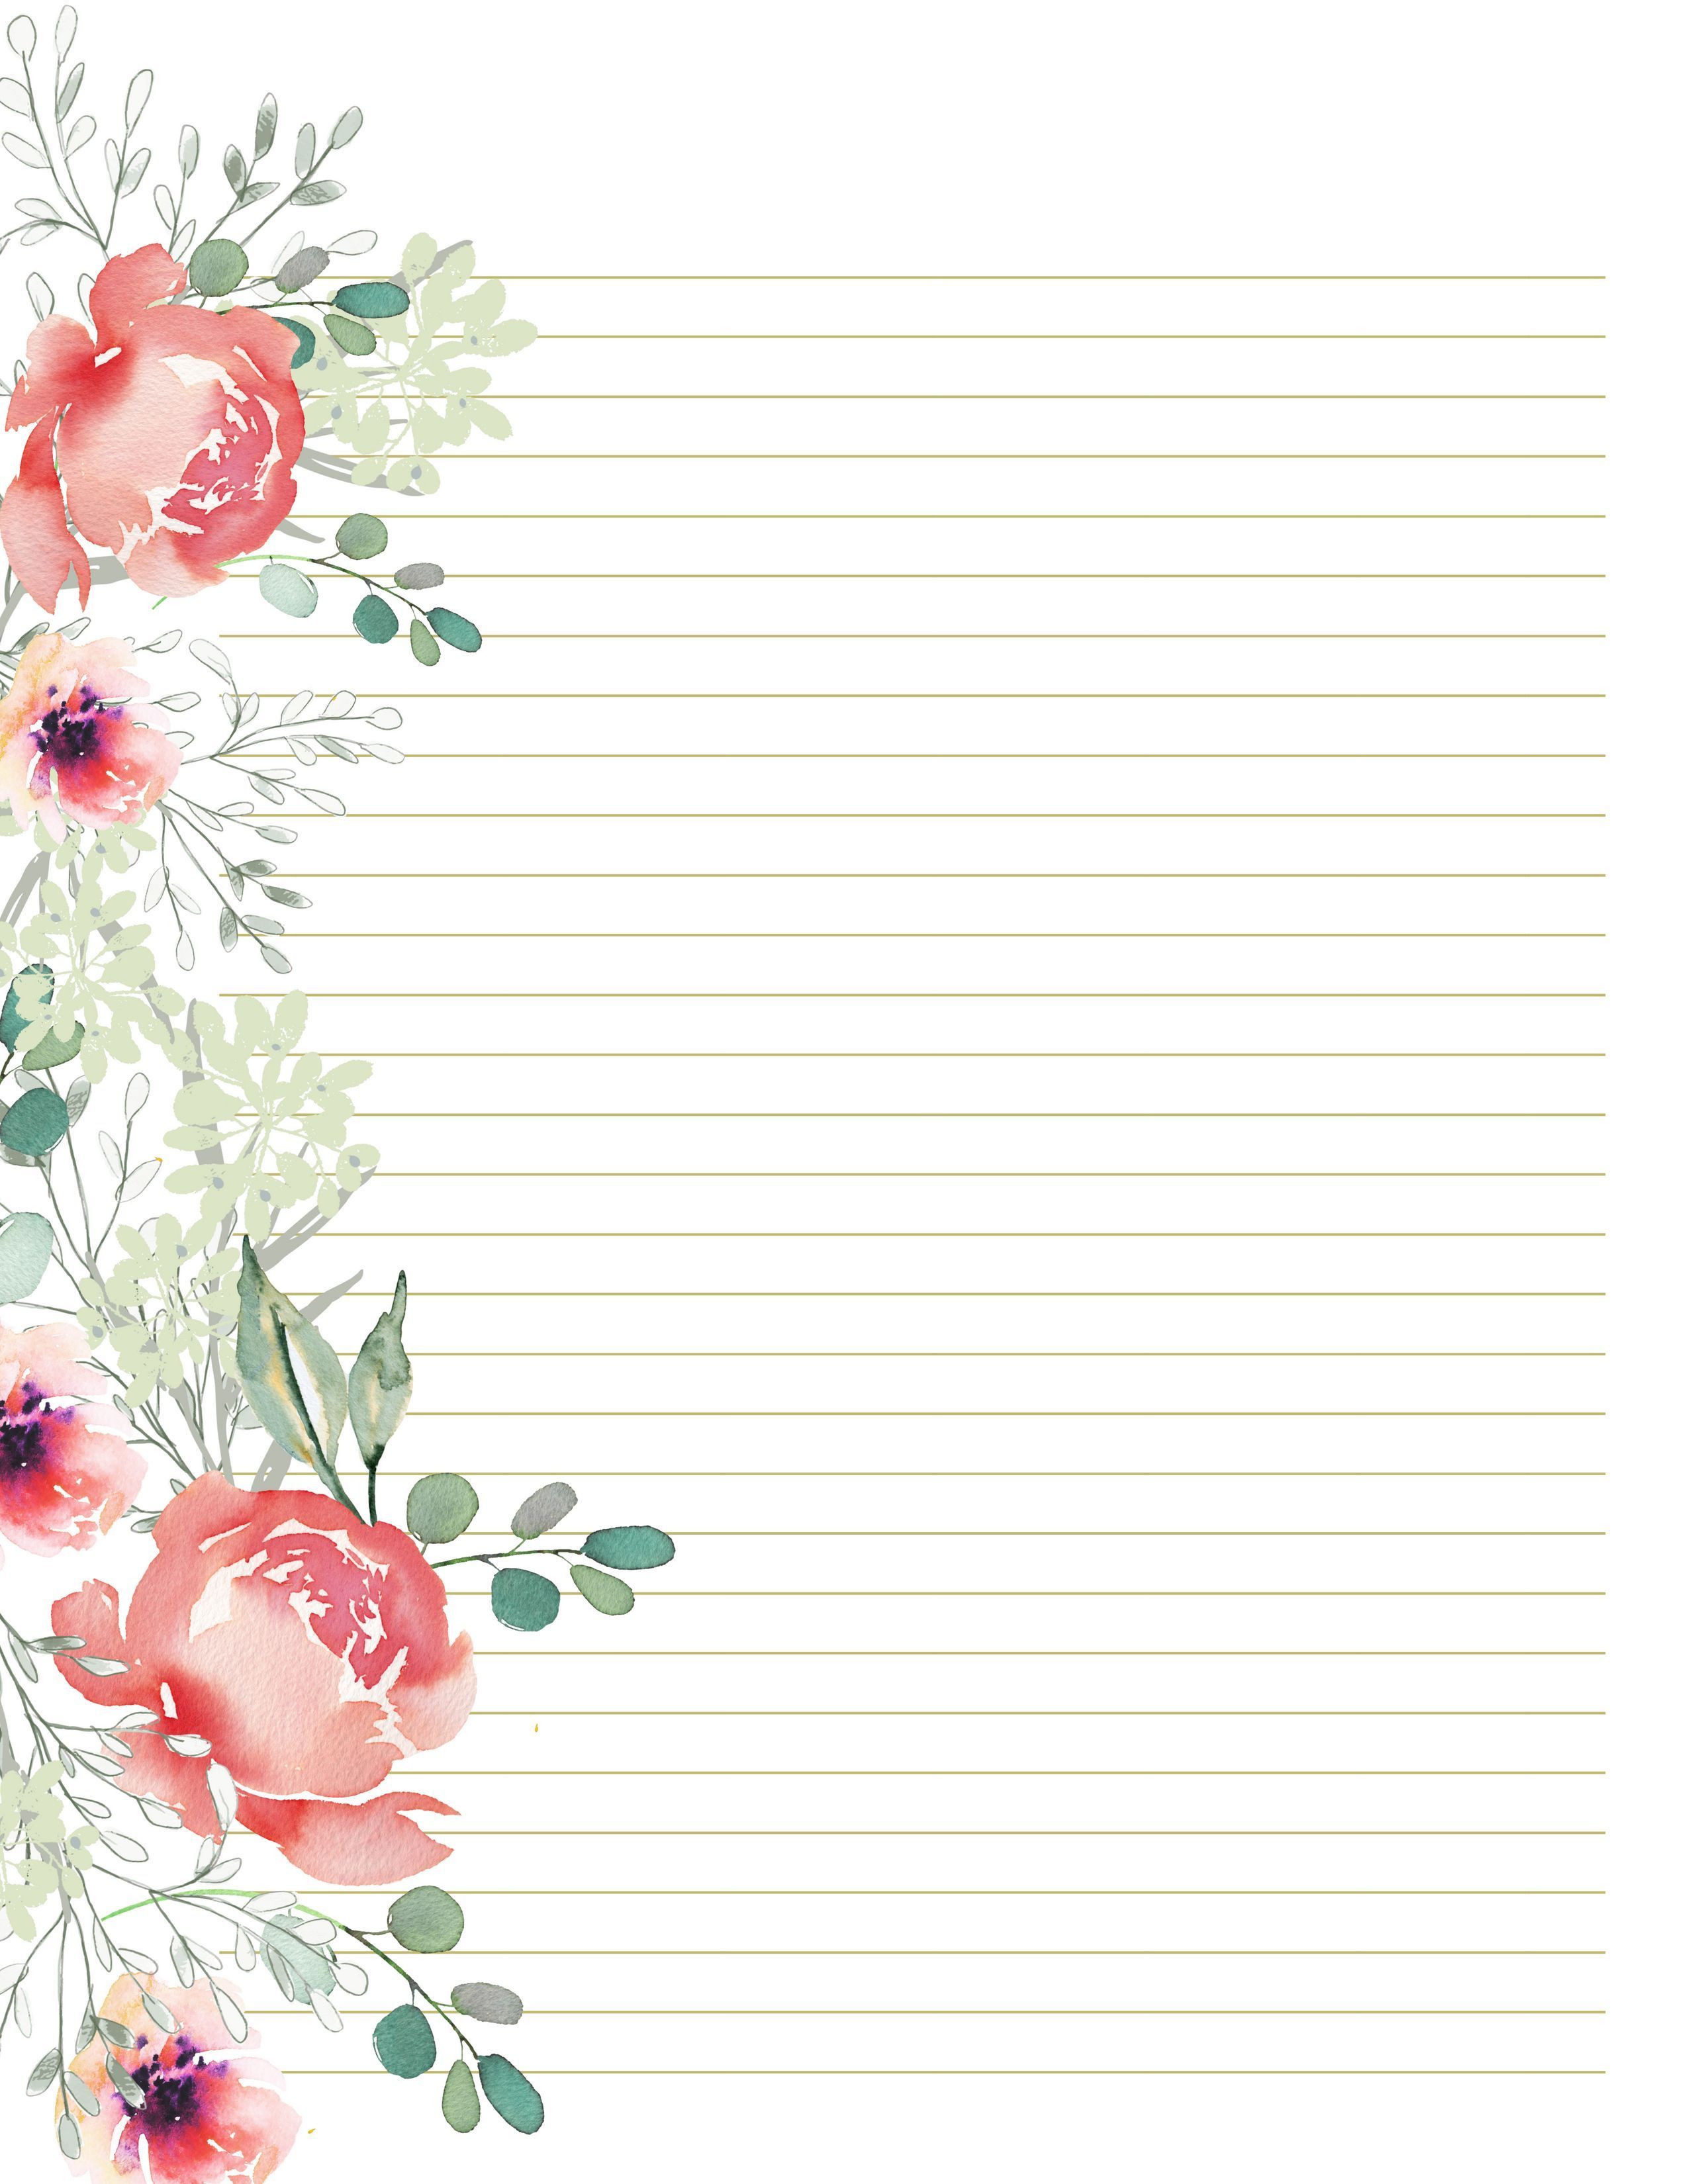 Floral stationery set purple floral stationery printable free printable stationery writing paper printable stationery printable stationery